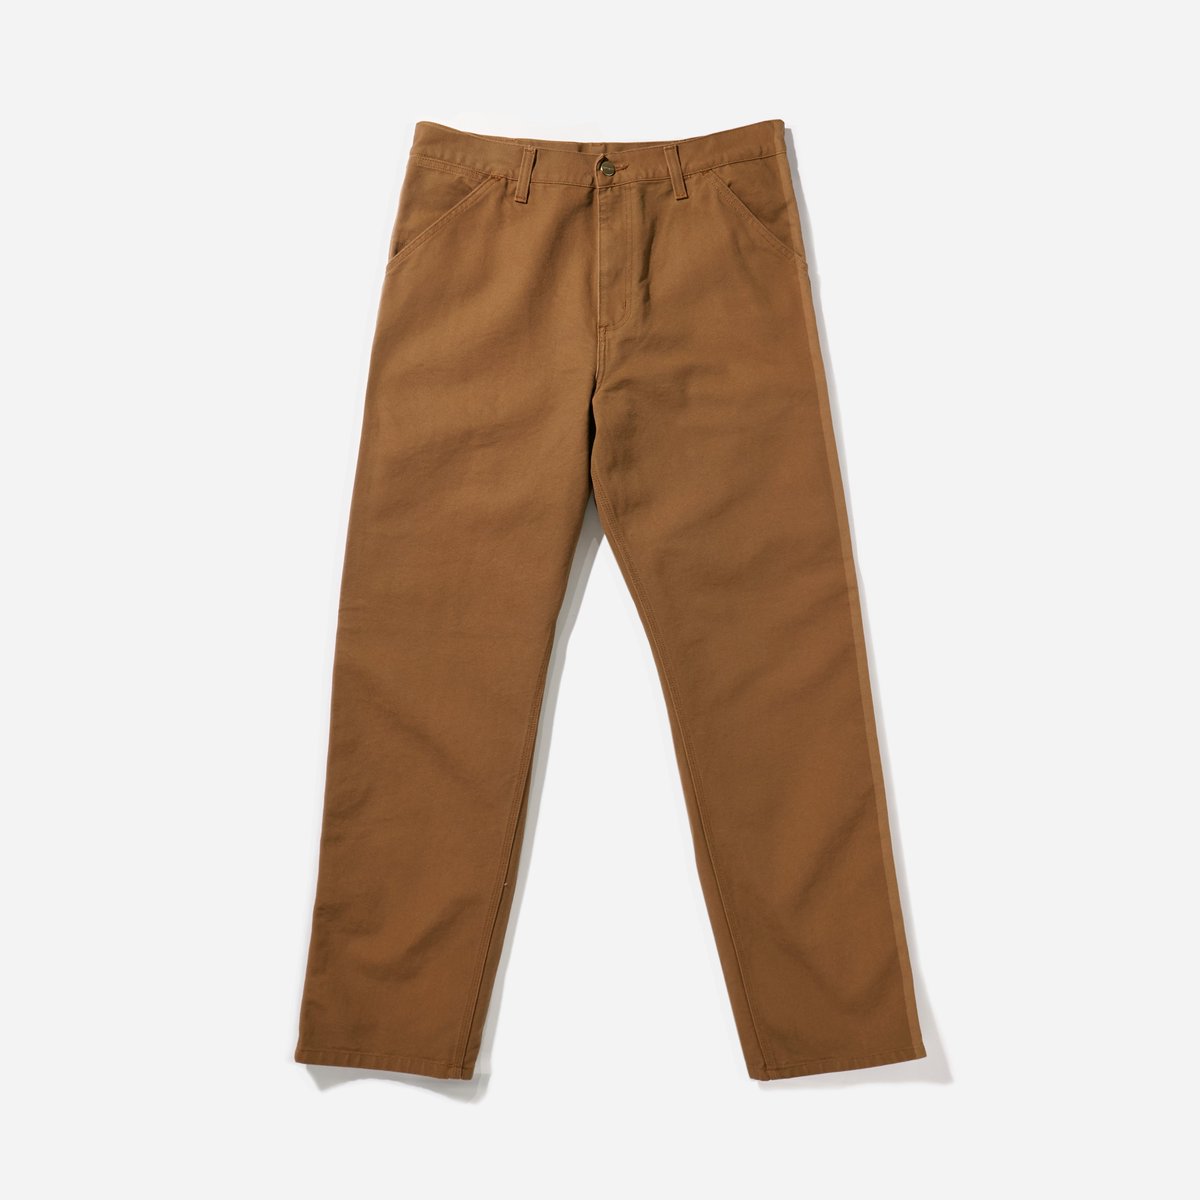 Inspired by classic workwear - the Carhartt WIP Single Knee Pant is recognised by its heavy-duty cotton canvas fabric as well as its utilitarian detailing at back. Available in a versatile range of colours. bit.ly/3vqbdAd #HIP #CarharttWIP